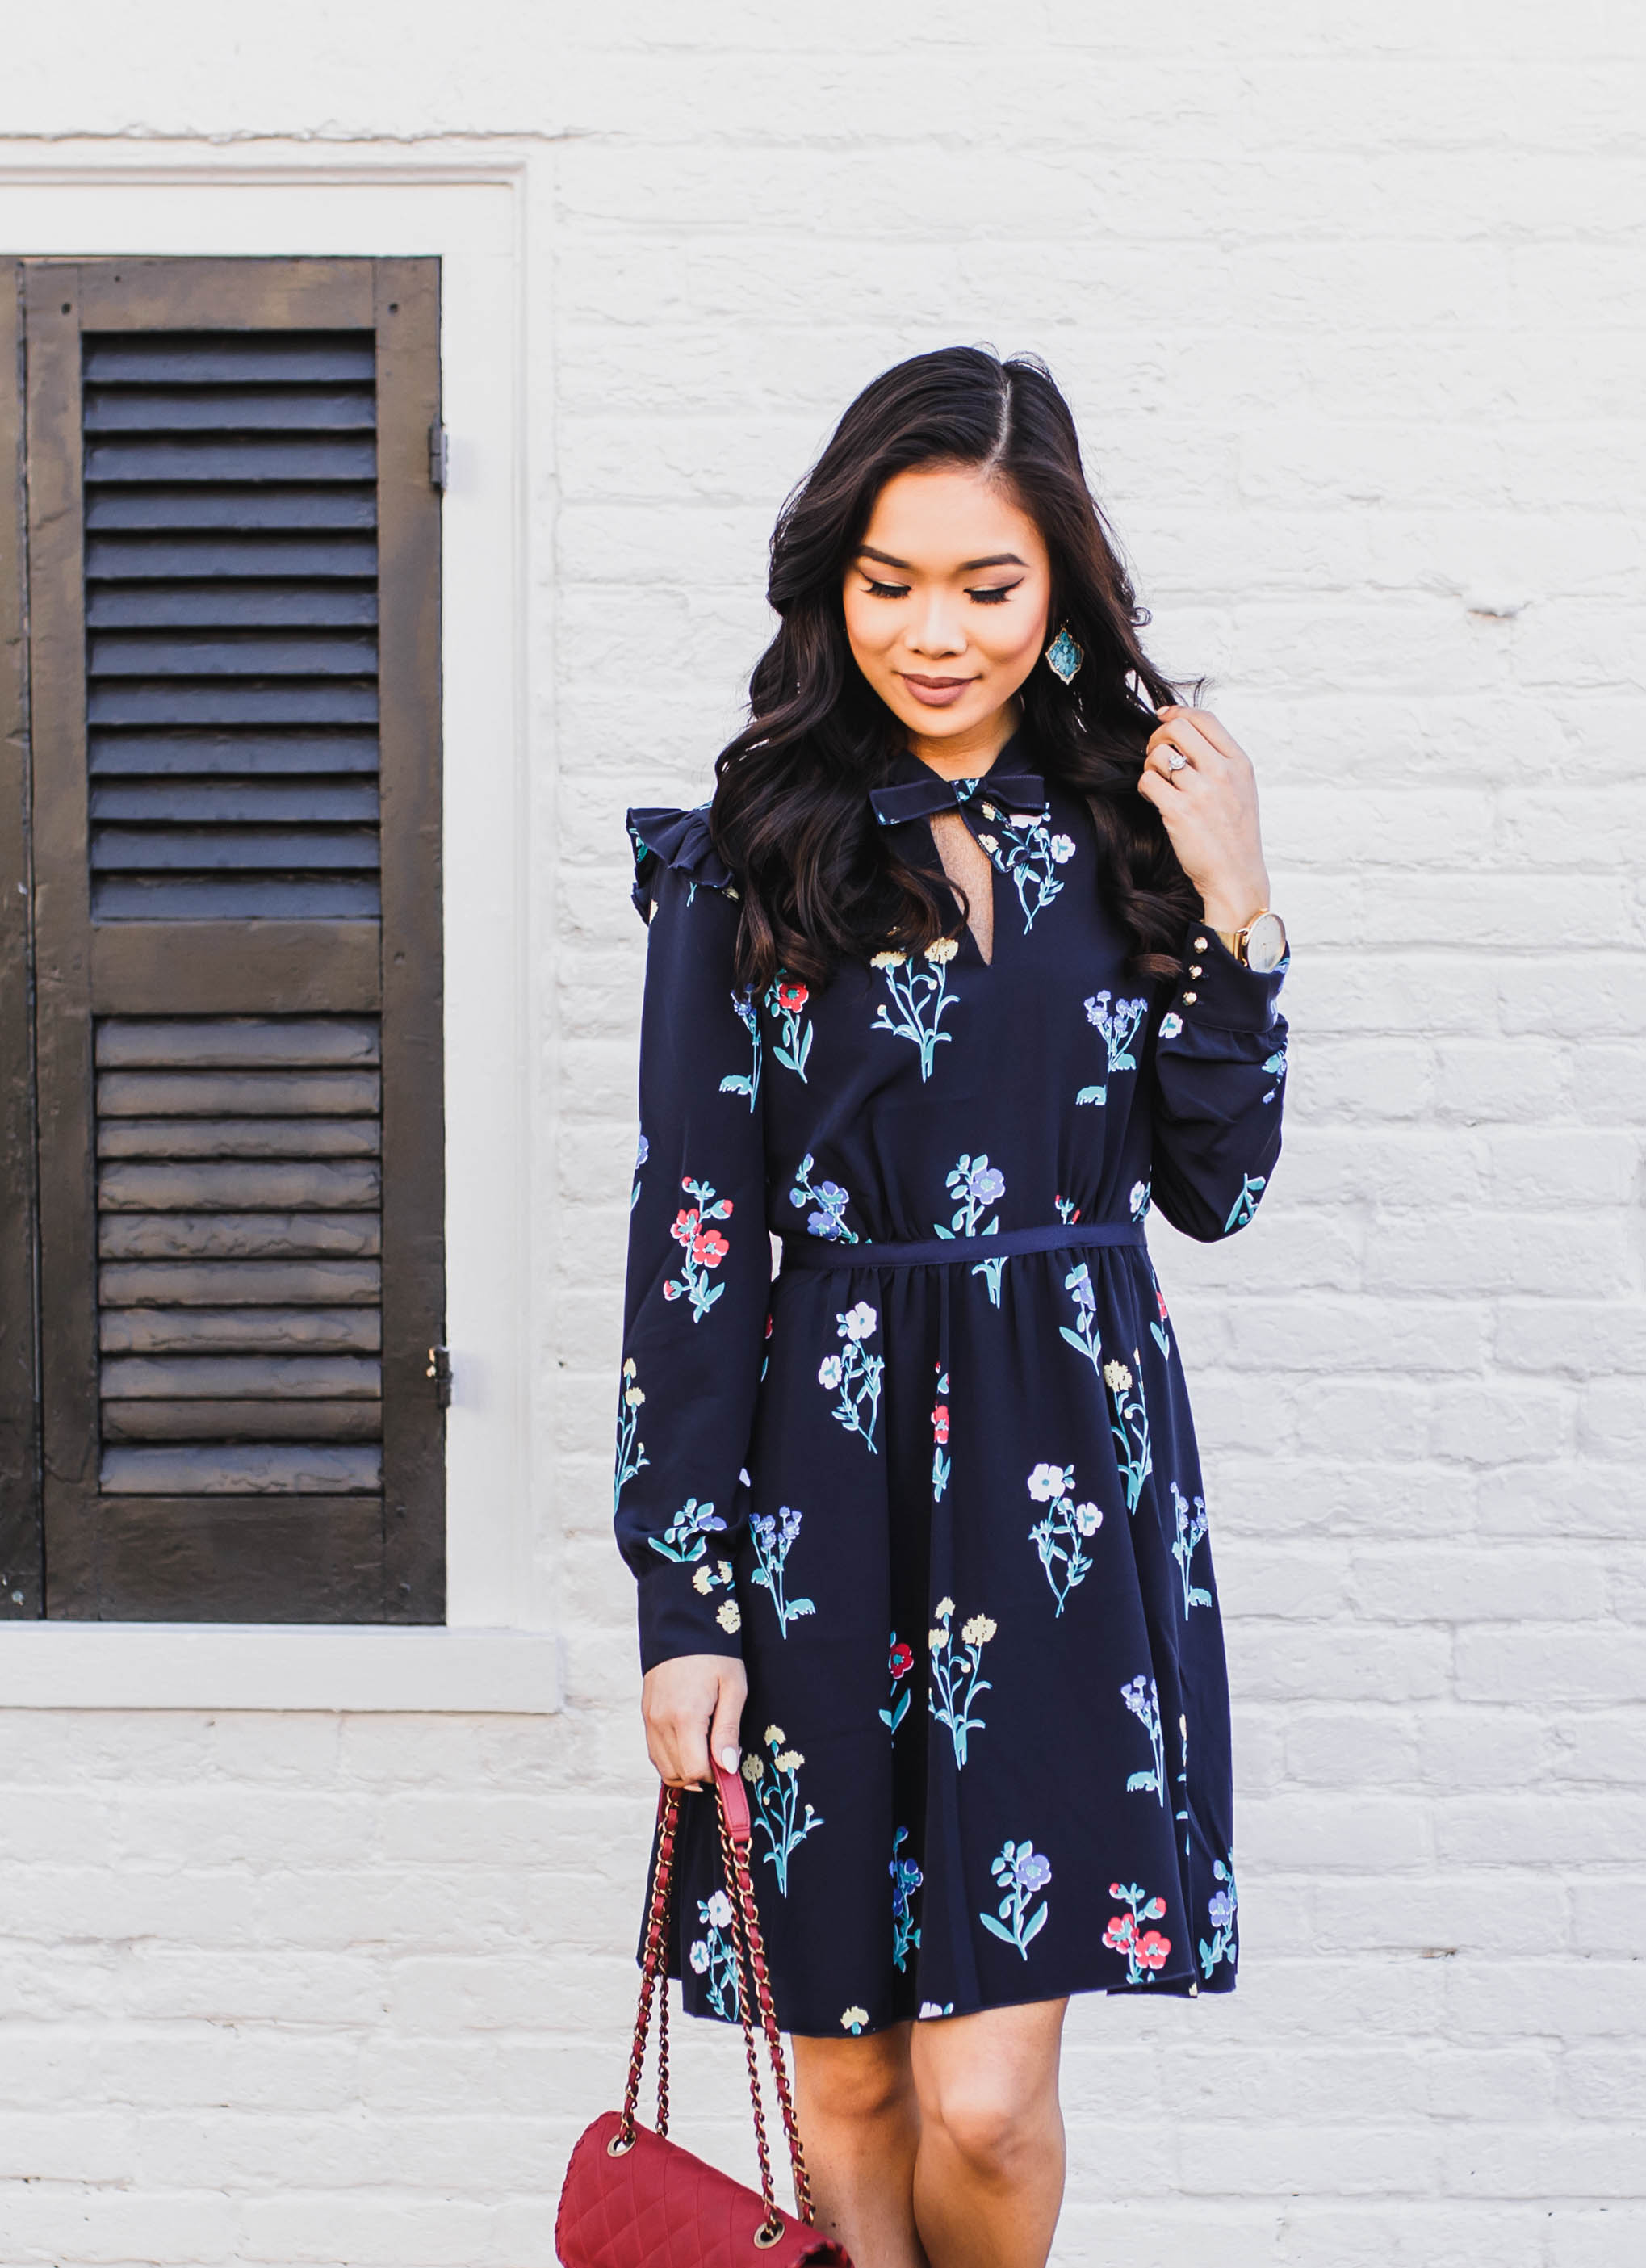 Blogger Hoang-Kim wears the Tisdale floral dress for Spring with a red Chanel flap bag